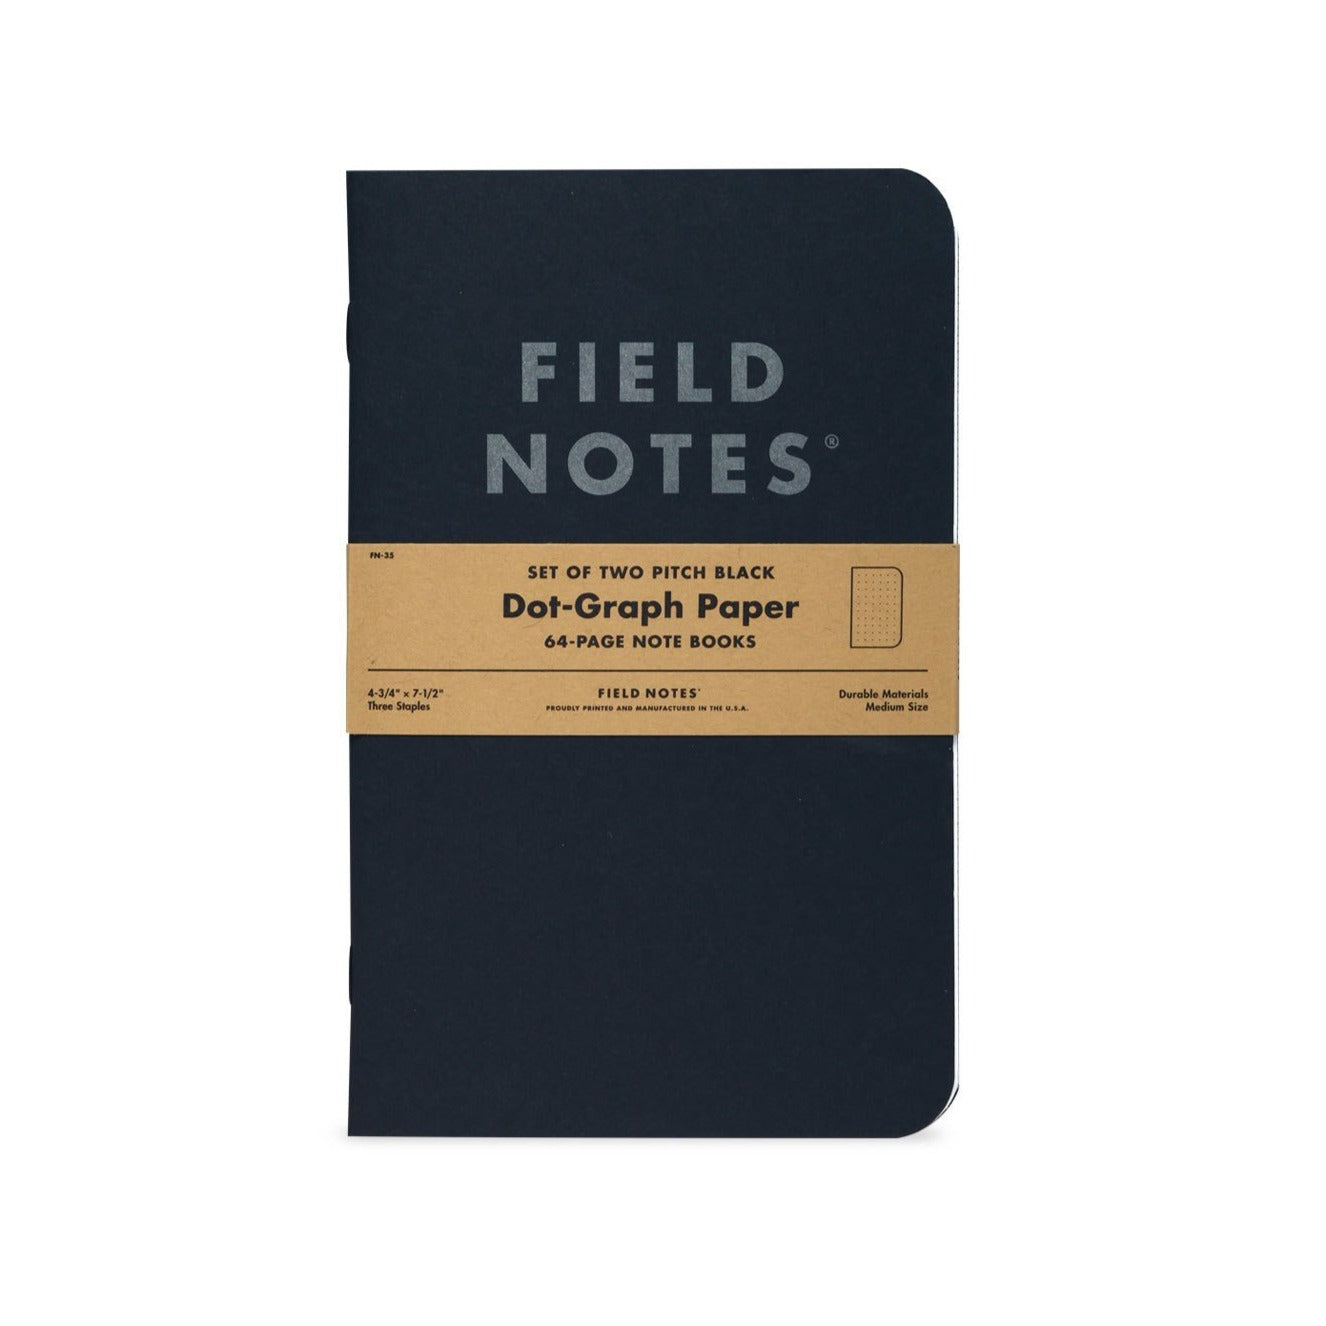 Field Notes, Pitch Black Note Books, Dot-Graph